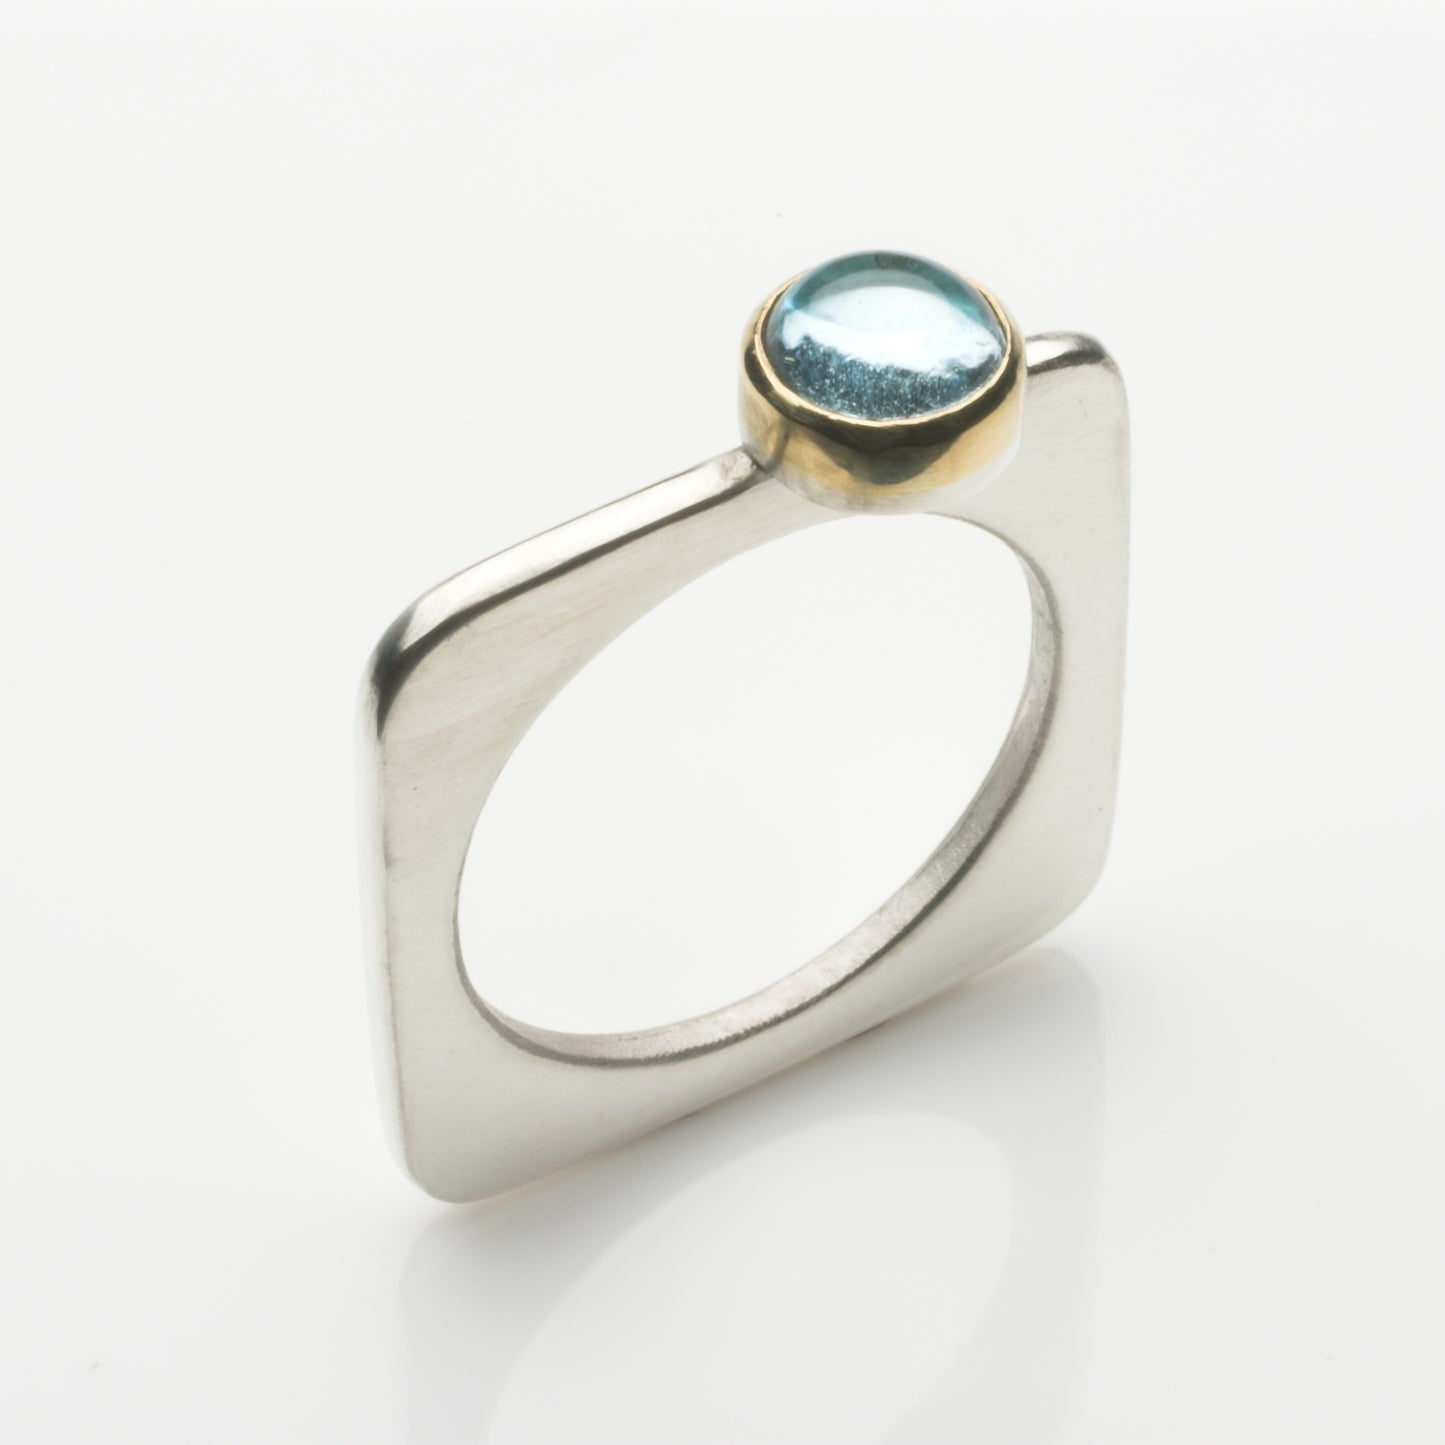 Square silver ring with pale blue topaz, 6mm